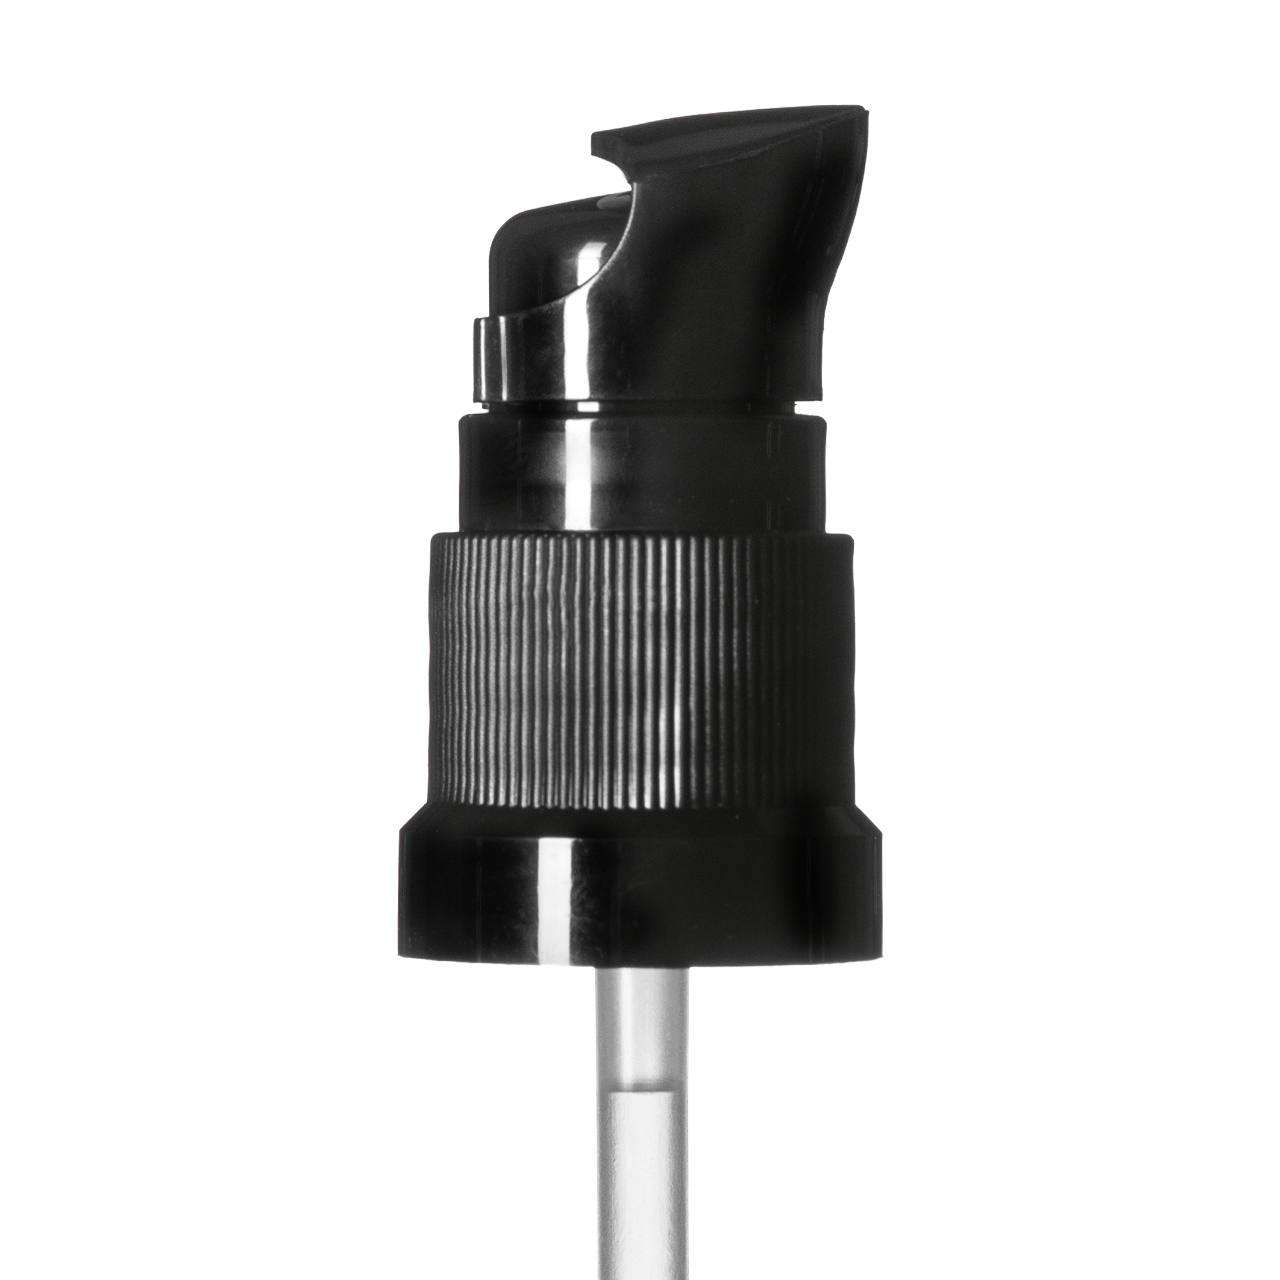 Lotion pump Metropolitan DIN18, PP, black, ribbed, dose 0.14 ml, with security clip (for Orion 5-100 ml)